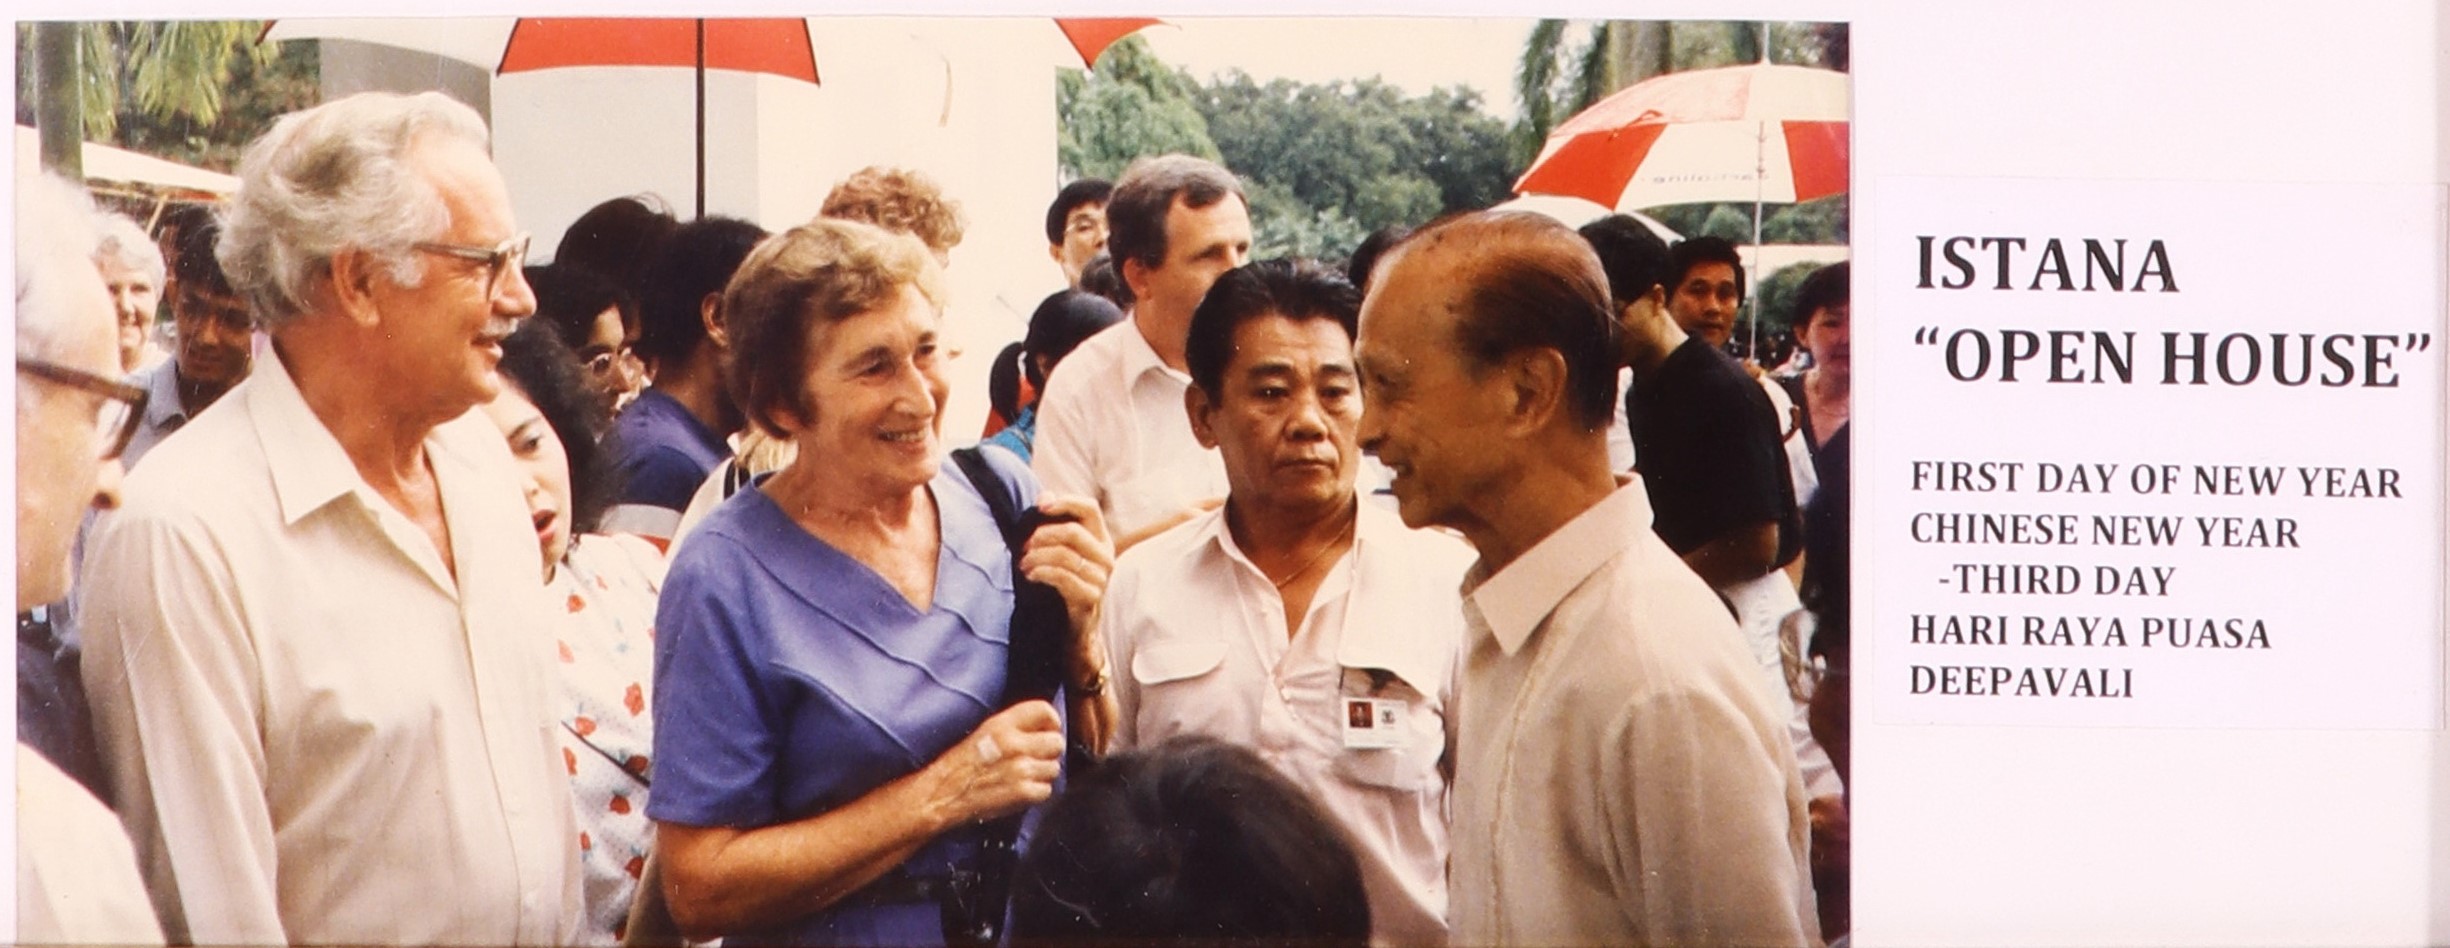  1.	Photo of Rewa Mirpuri with President Wee at the “Open House”